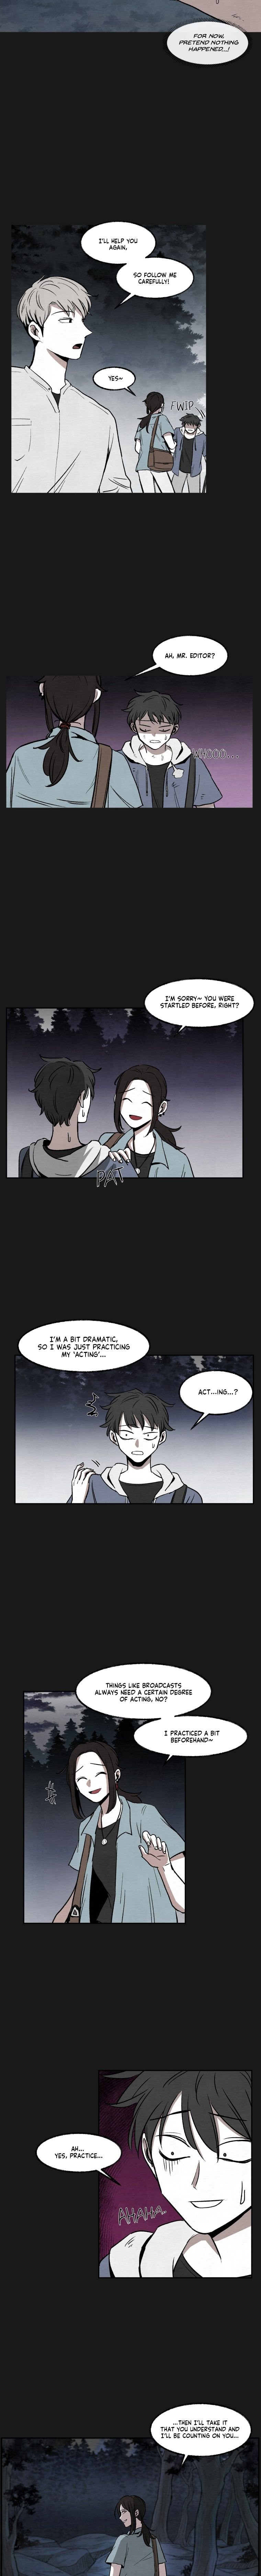 Devil’s Editing Chapter 4 - Page 2